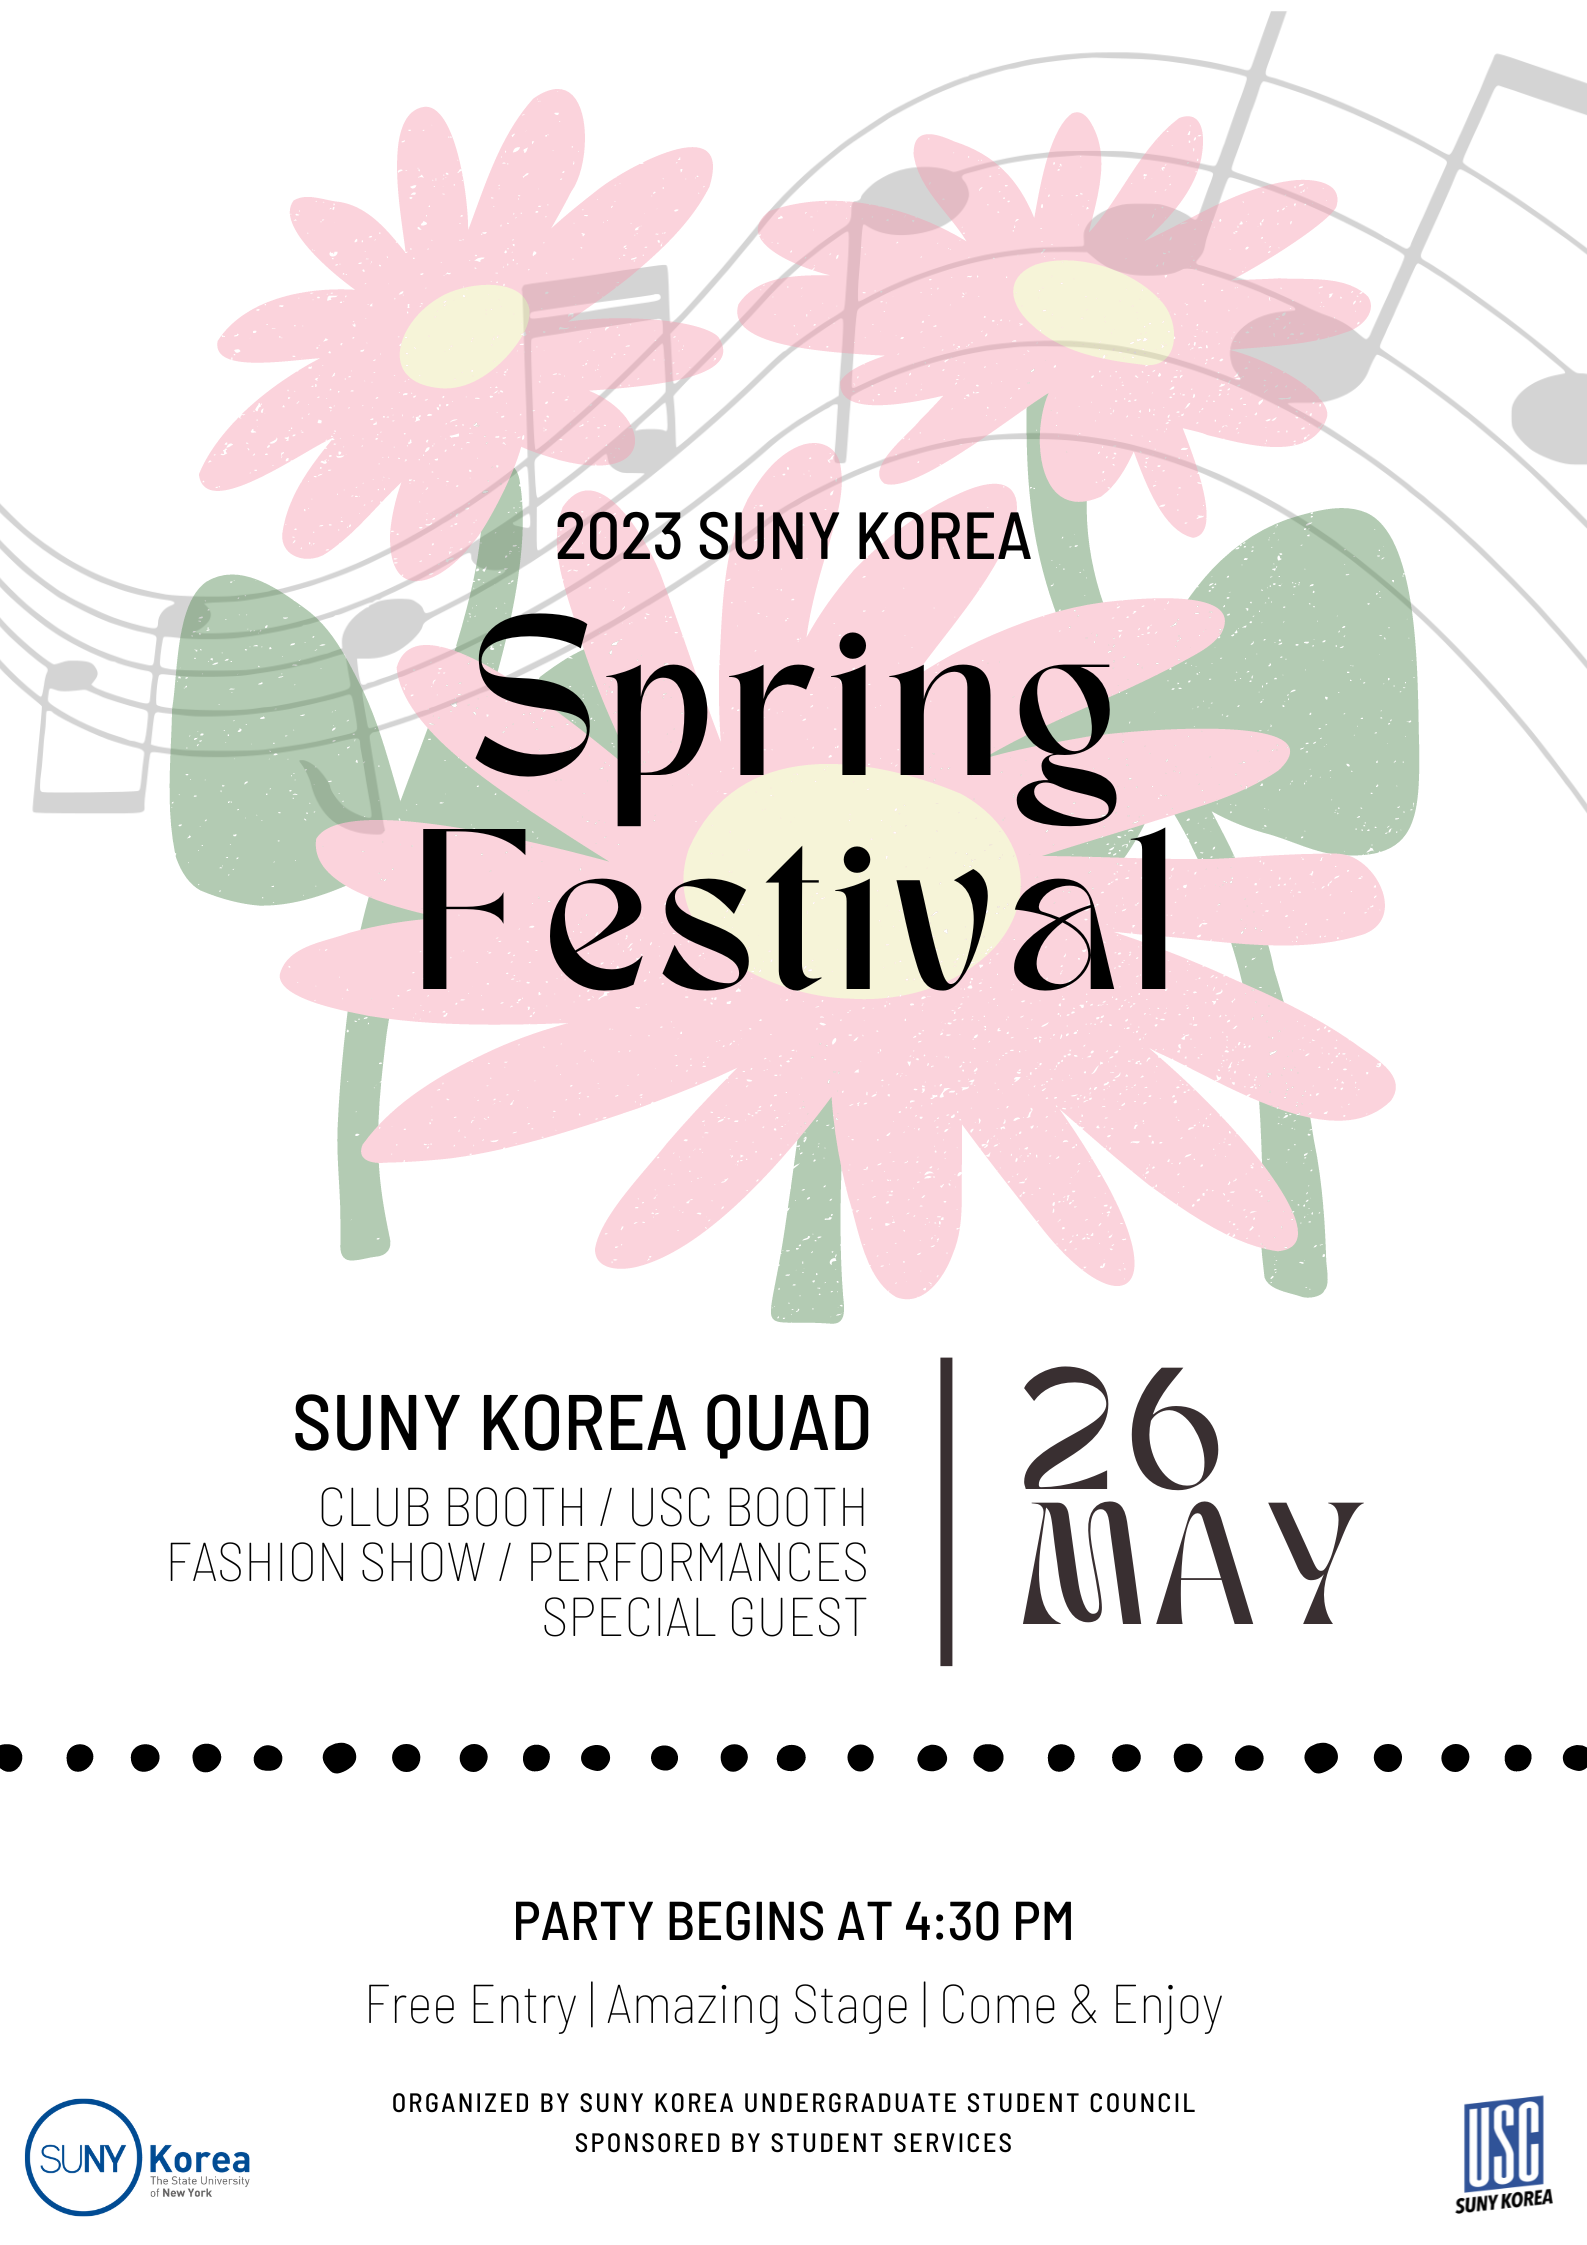 2023 SUNY KOREA Spring Festival SUNY KOREA QUAD CLUB BOOTH / USC BOOTH FASHION SHOW / PERFORMANCES SPECIAL GUEST 26MAY / PARTY BEGINS AT 4:30PM Free Entry | Amazing Stage | Come & Enjoy. ORGANIZED BY SUNY KOREA UNDERGRADUATE STUDENT COUNCIL SPONSORED BY STUDENT SERVICES / SUNY Korea. USC SUNY KOREA